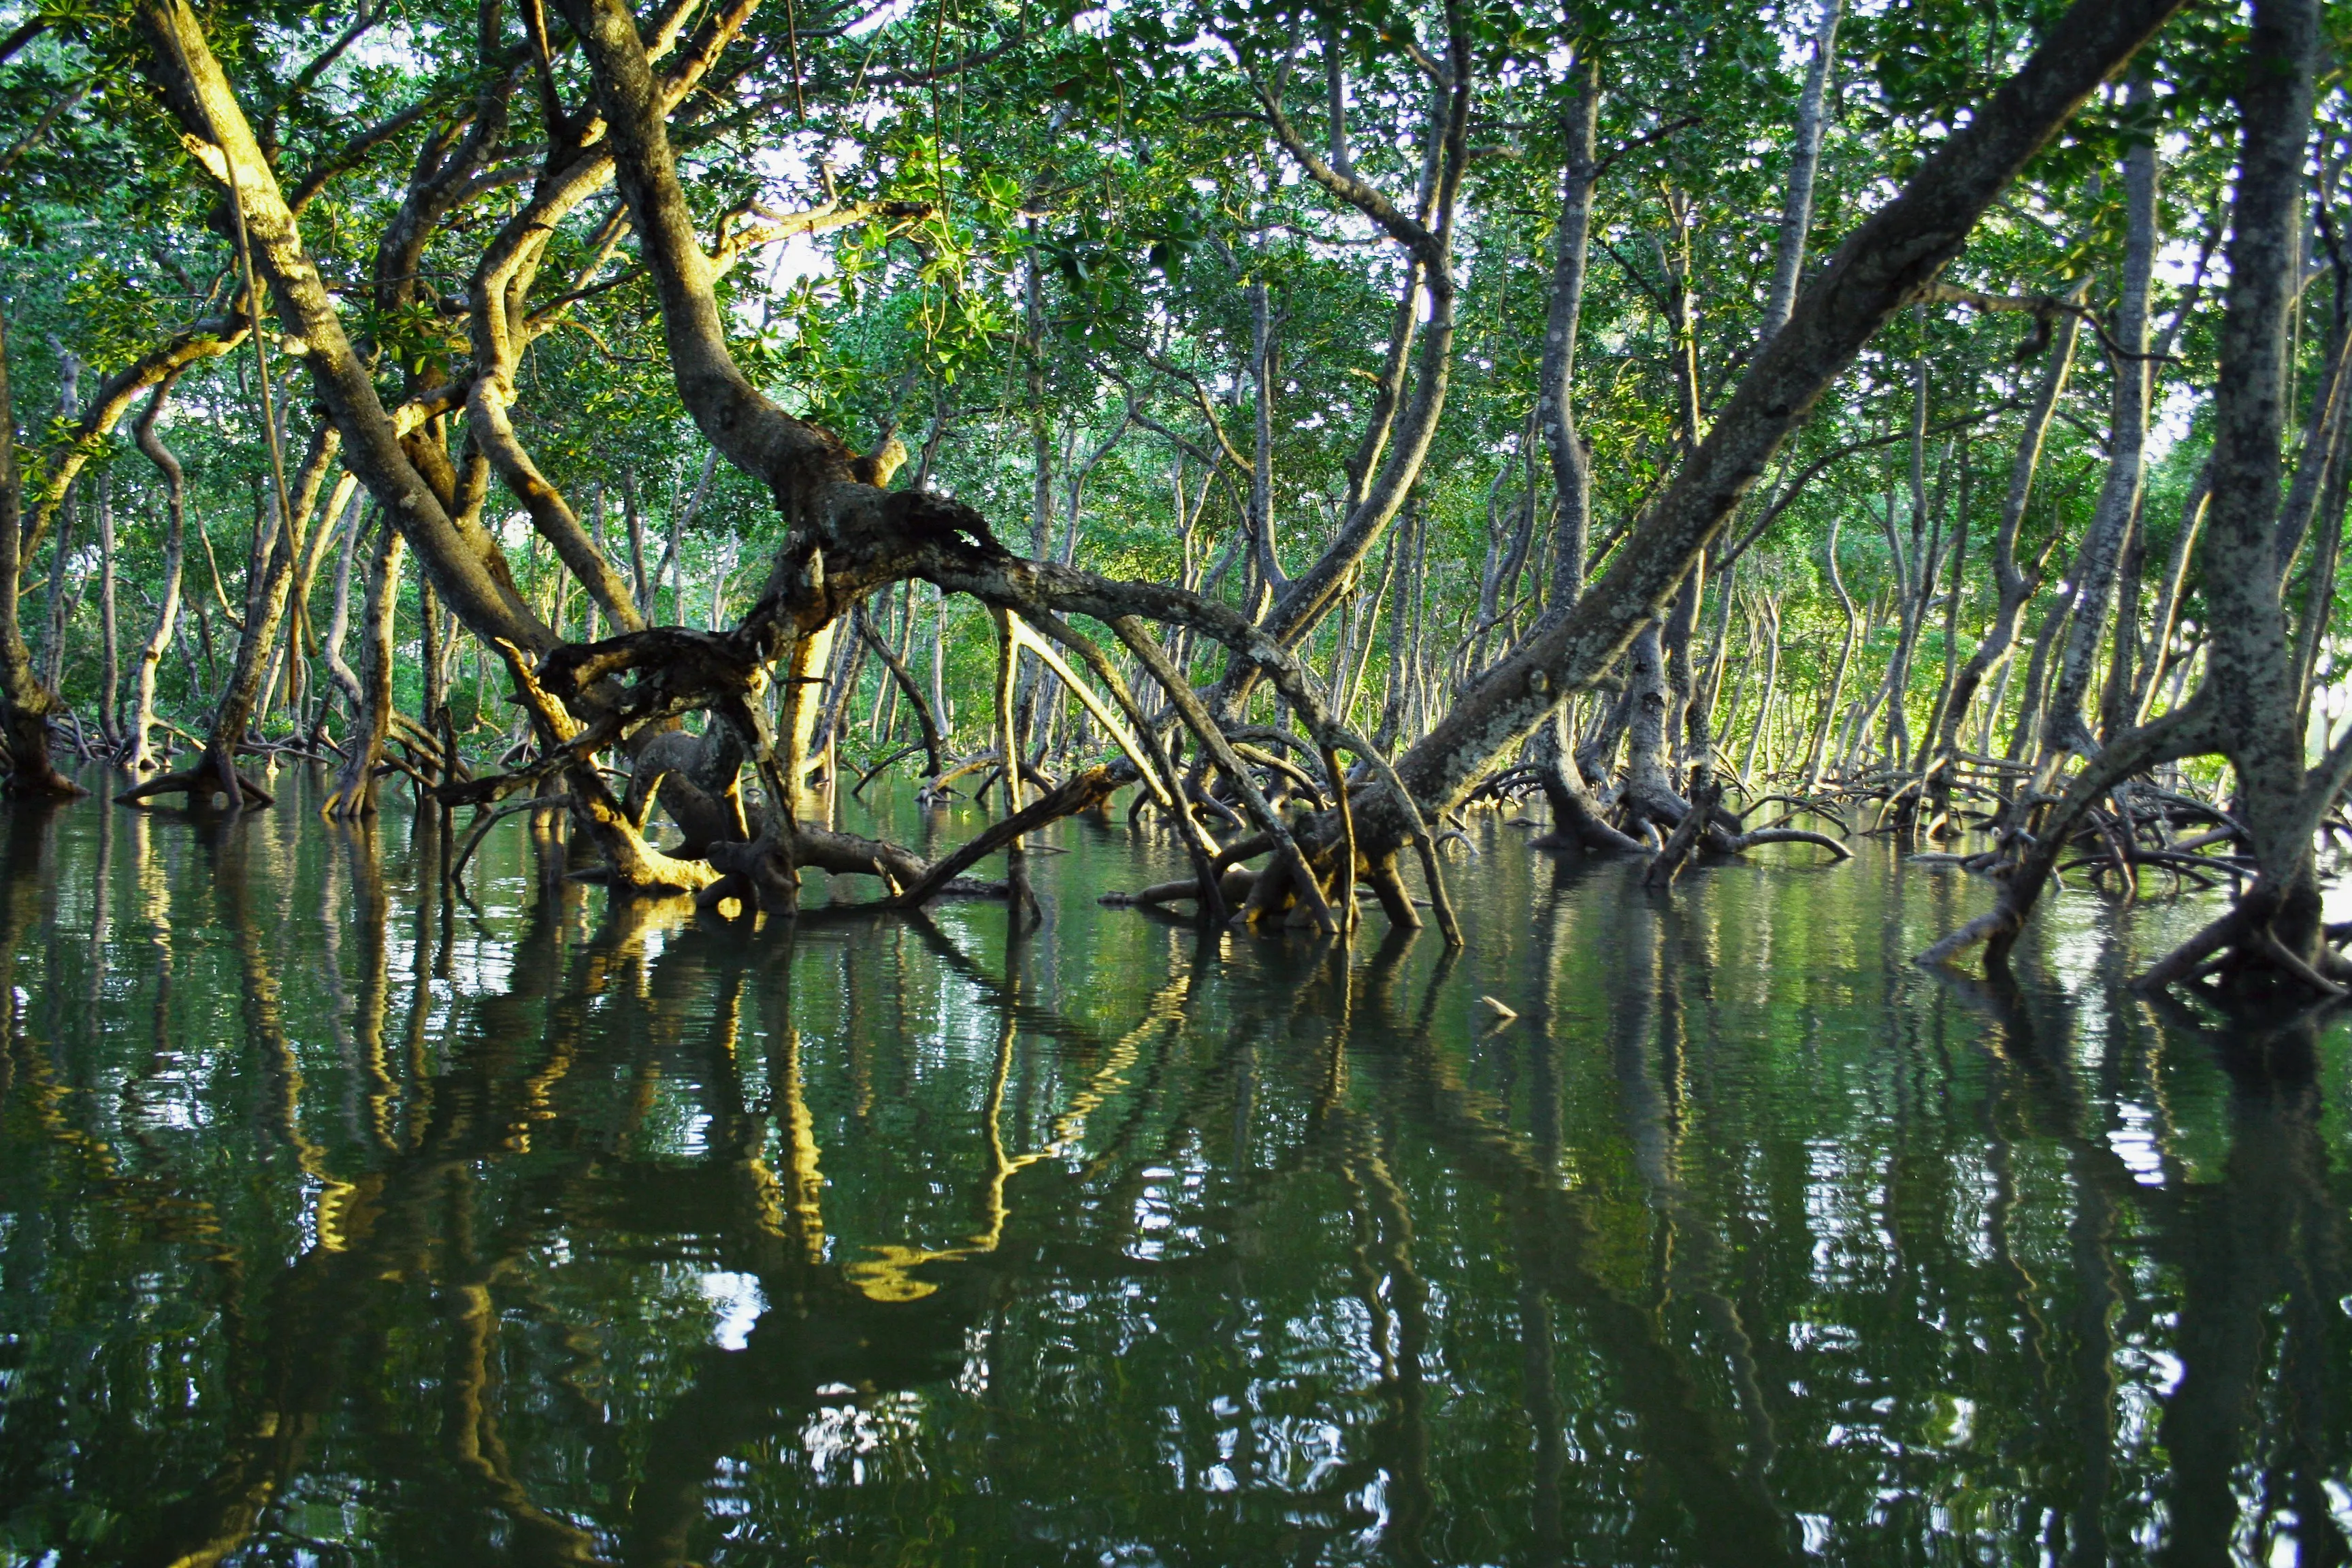 sundarban is famous for